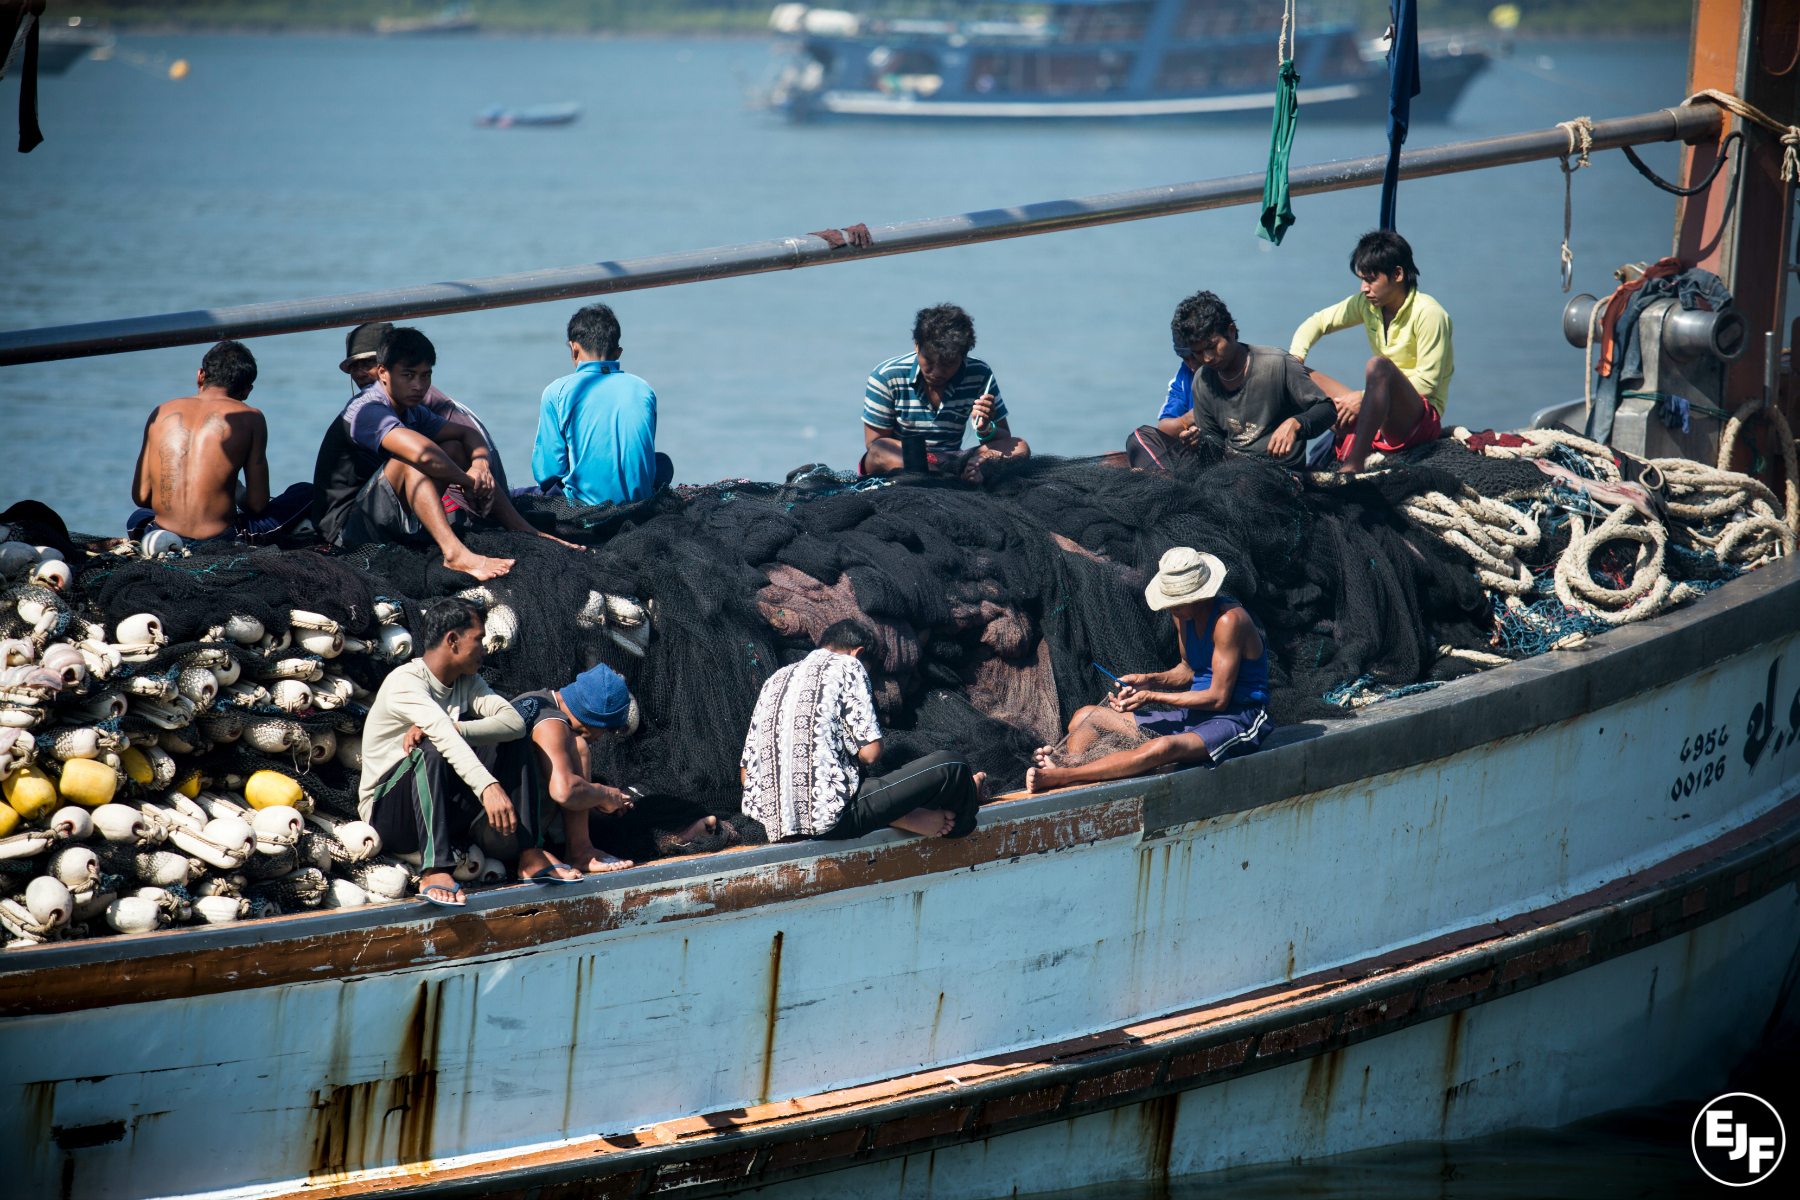 How reforming labour laws could boost Thailand’s fight against illegal fishing